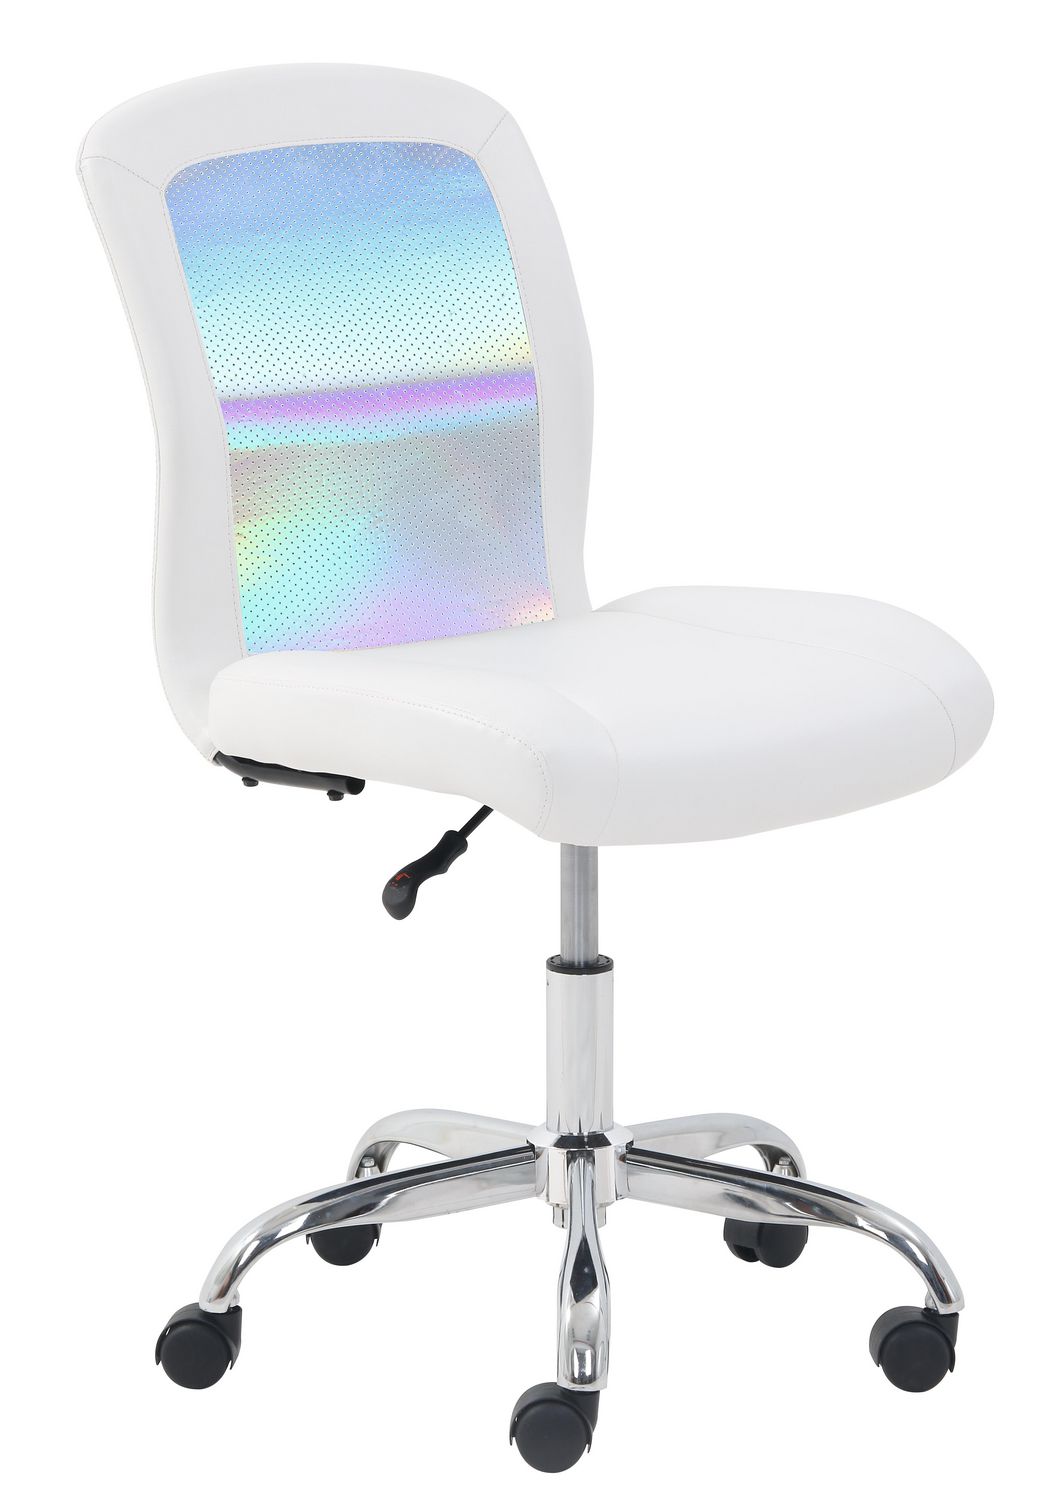 Mainstays Iridescent Office Chair, Unique iridescent design with